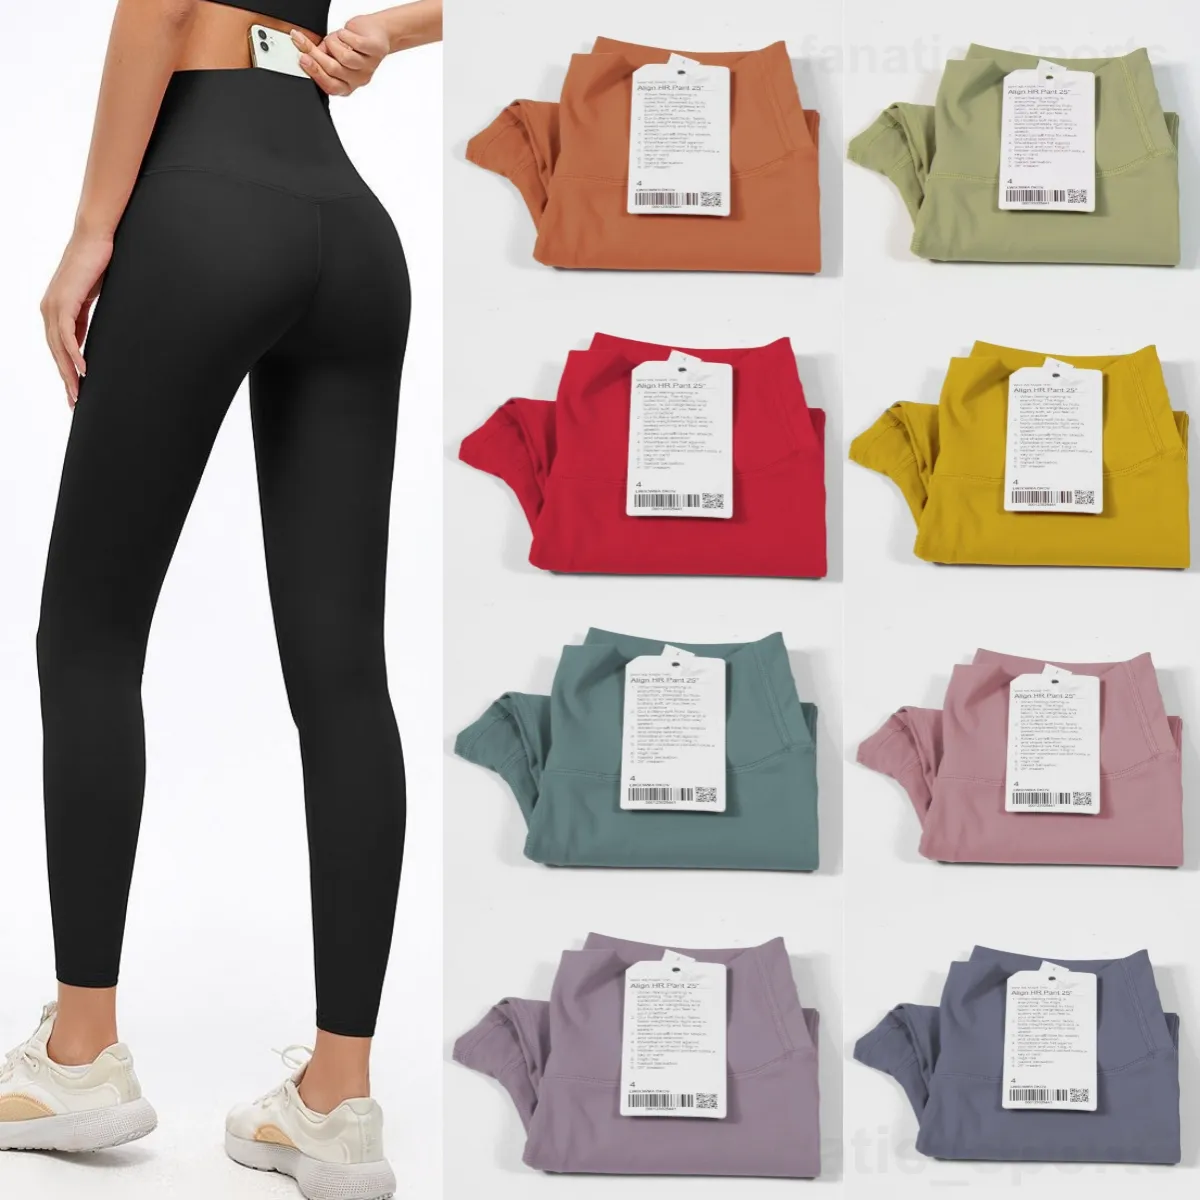 Align Seamless Lady Lululu Yogas Trousers Luluemon Women Joggers Breathable Ankle Length Pants Upturned Buttocks Sports Popular Exercise Legging Train Jogging